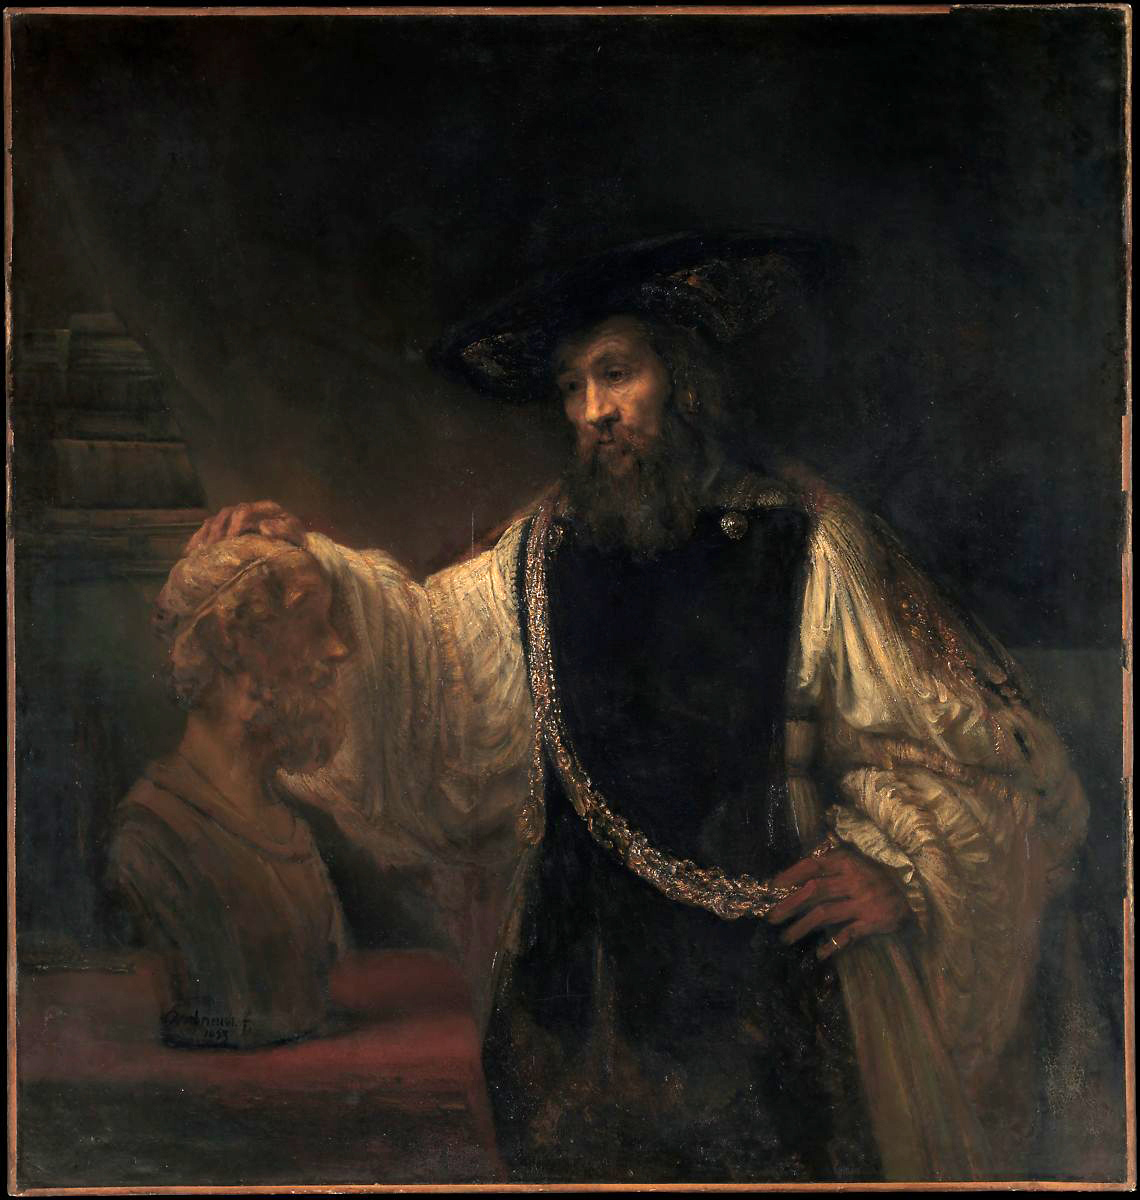 Aristotle with a Bust of Homer by Rembrandt, one of the old masters of portrait art.